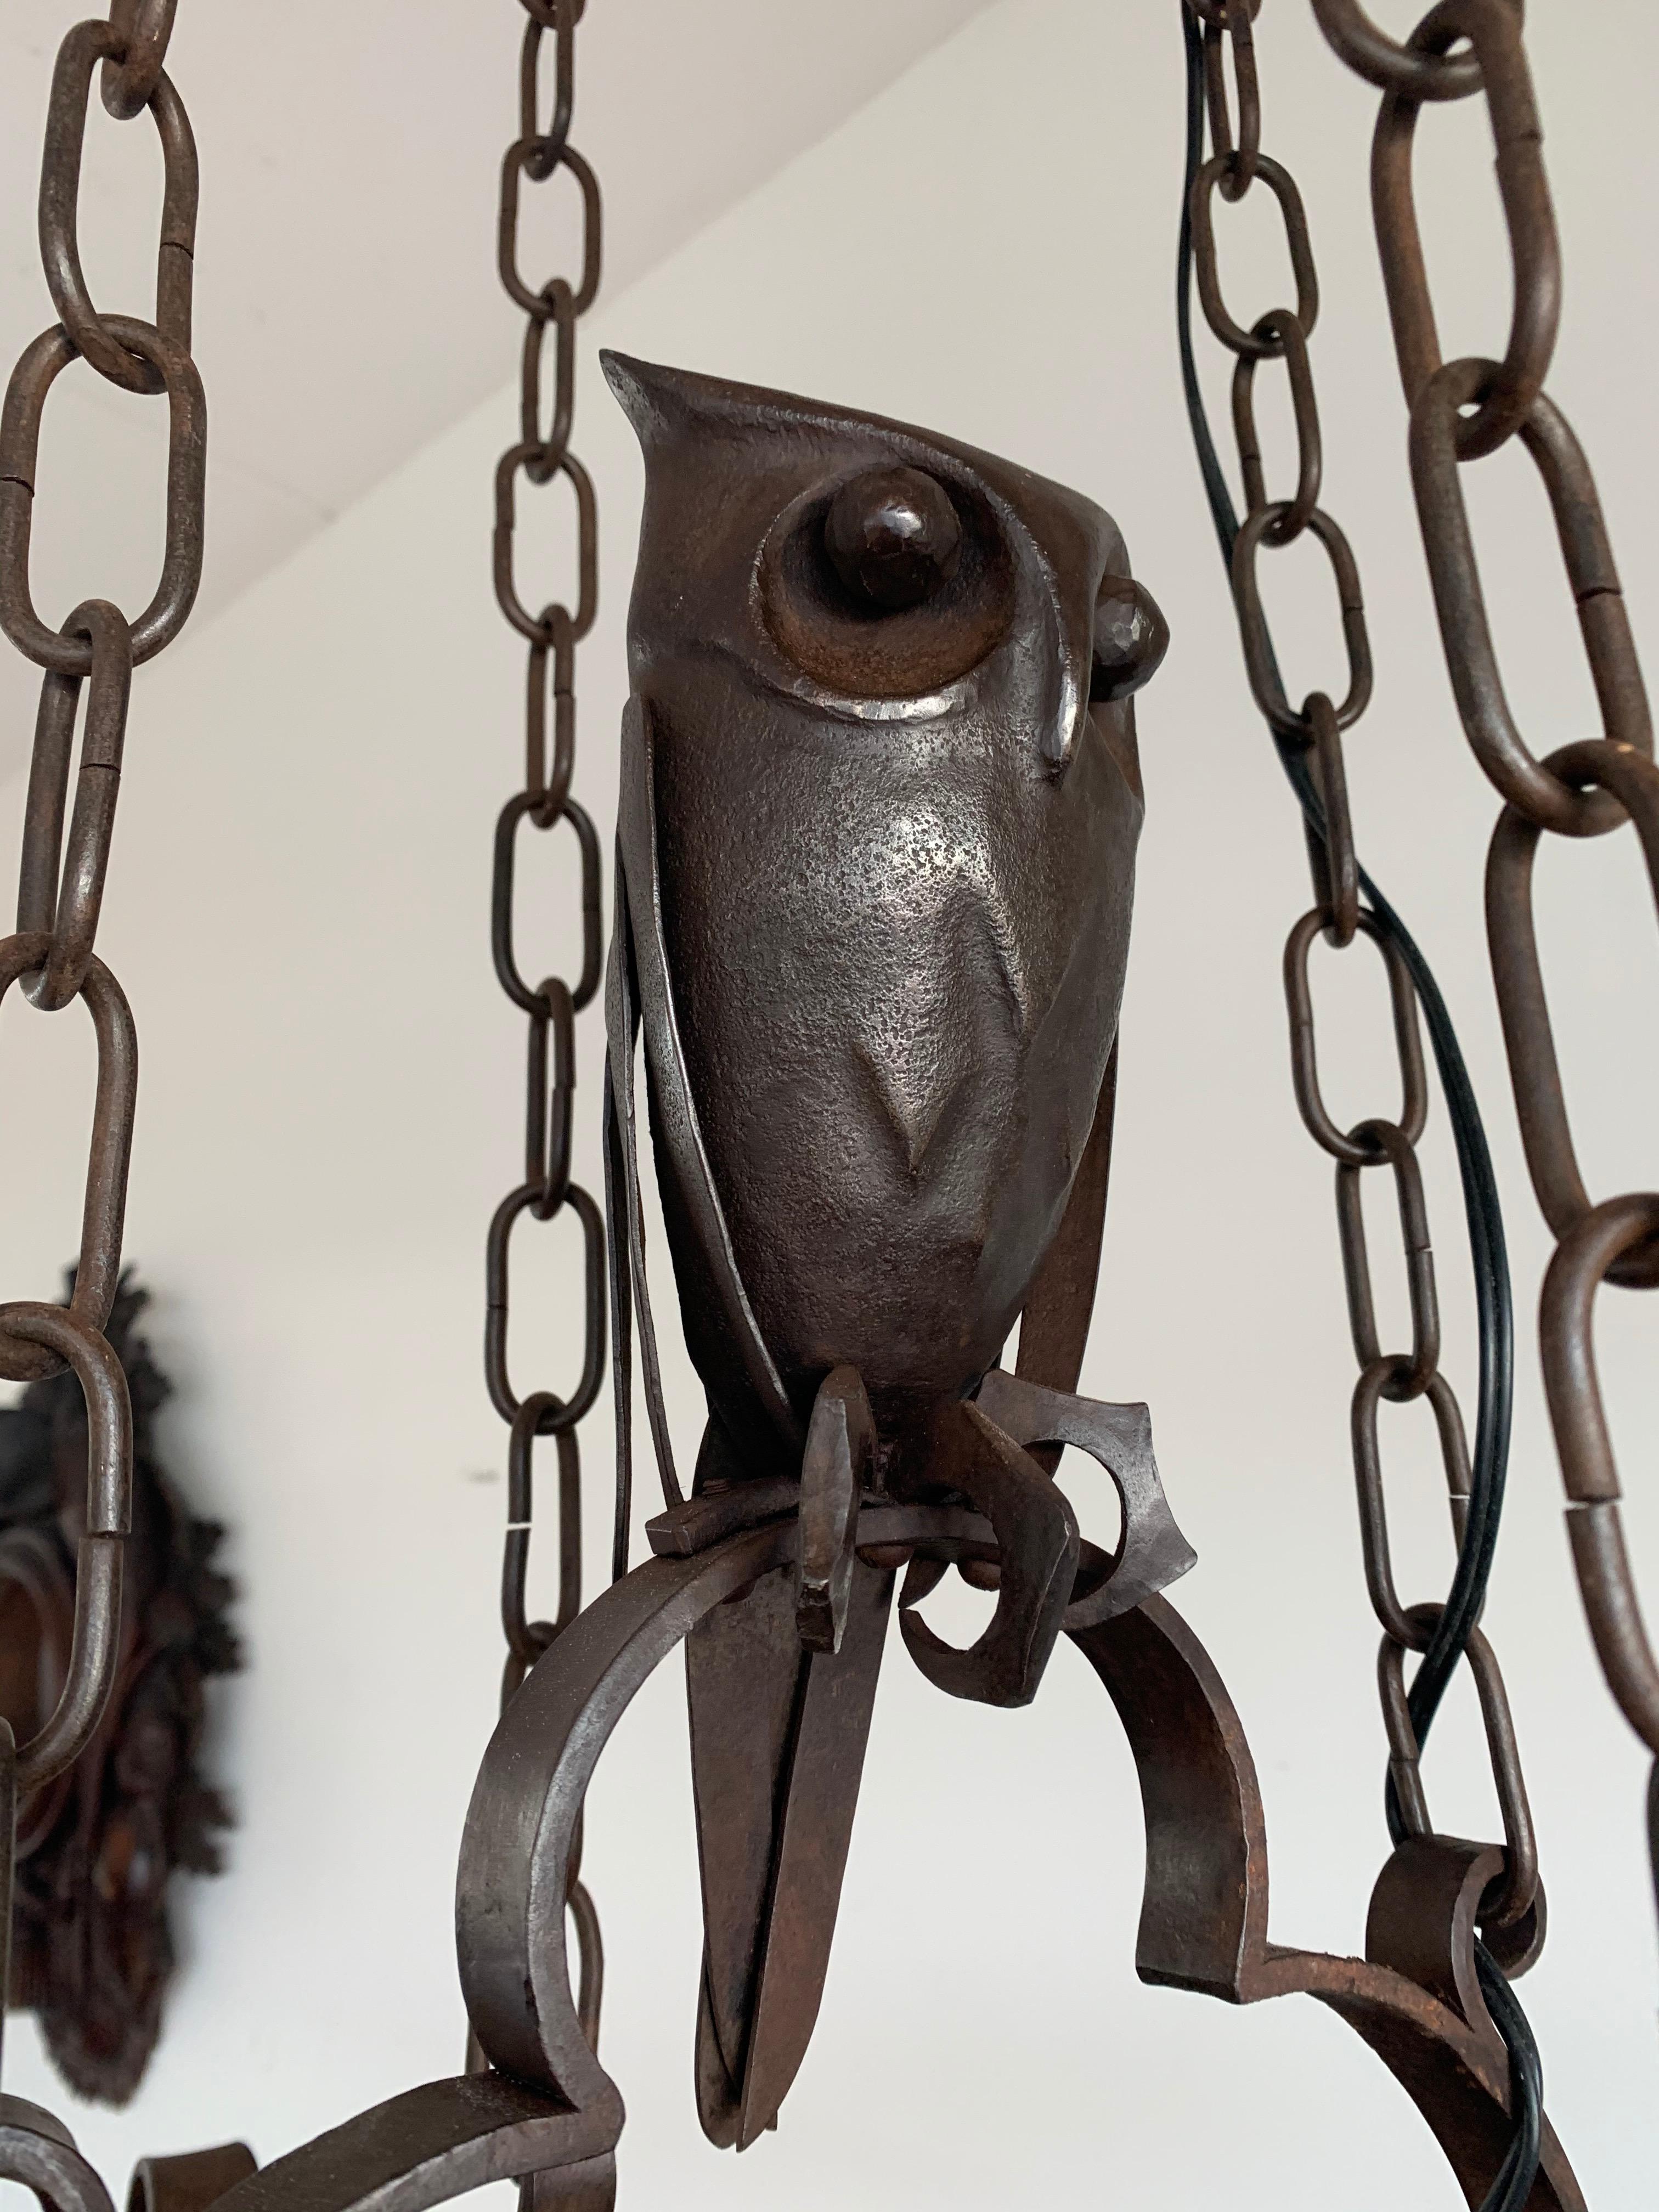 Amazing Arts and Crafts Wrought Iron Chandelier with Owl Sculpture, early 1900s 4